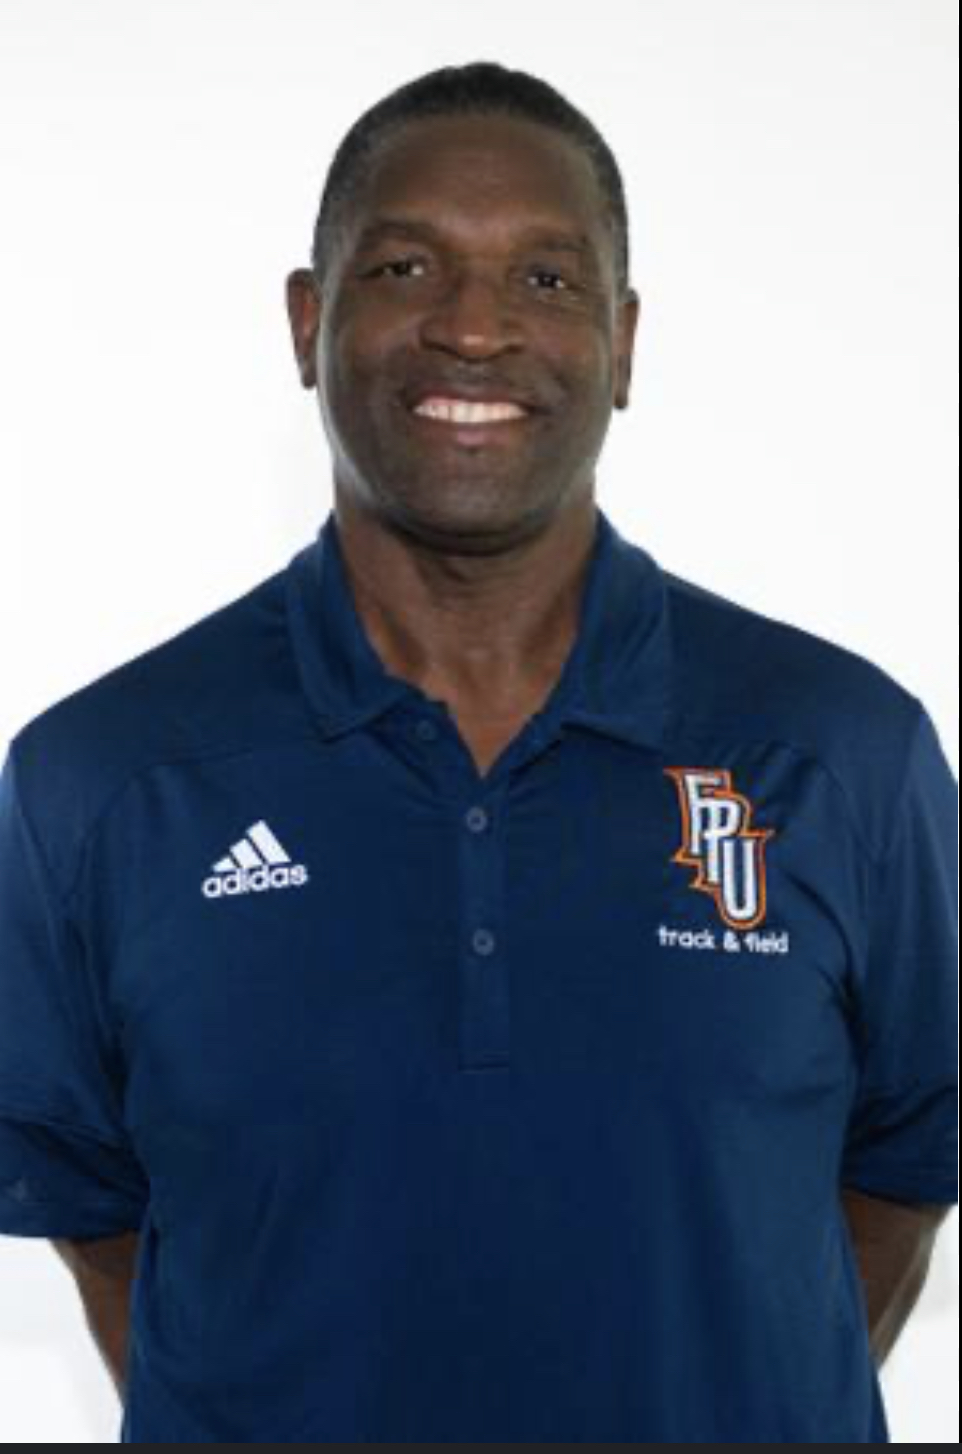 Robert Foster wearing a blue shirt with the Adidas logo and an FPU Track and Field logo. He has a wife smile on his face.